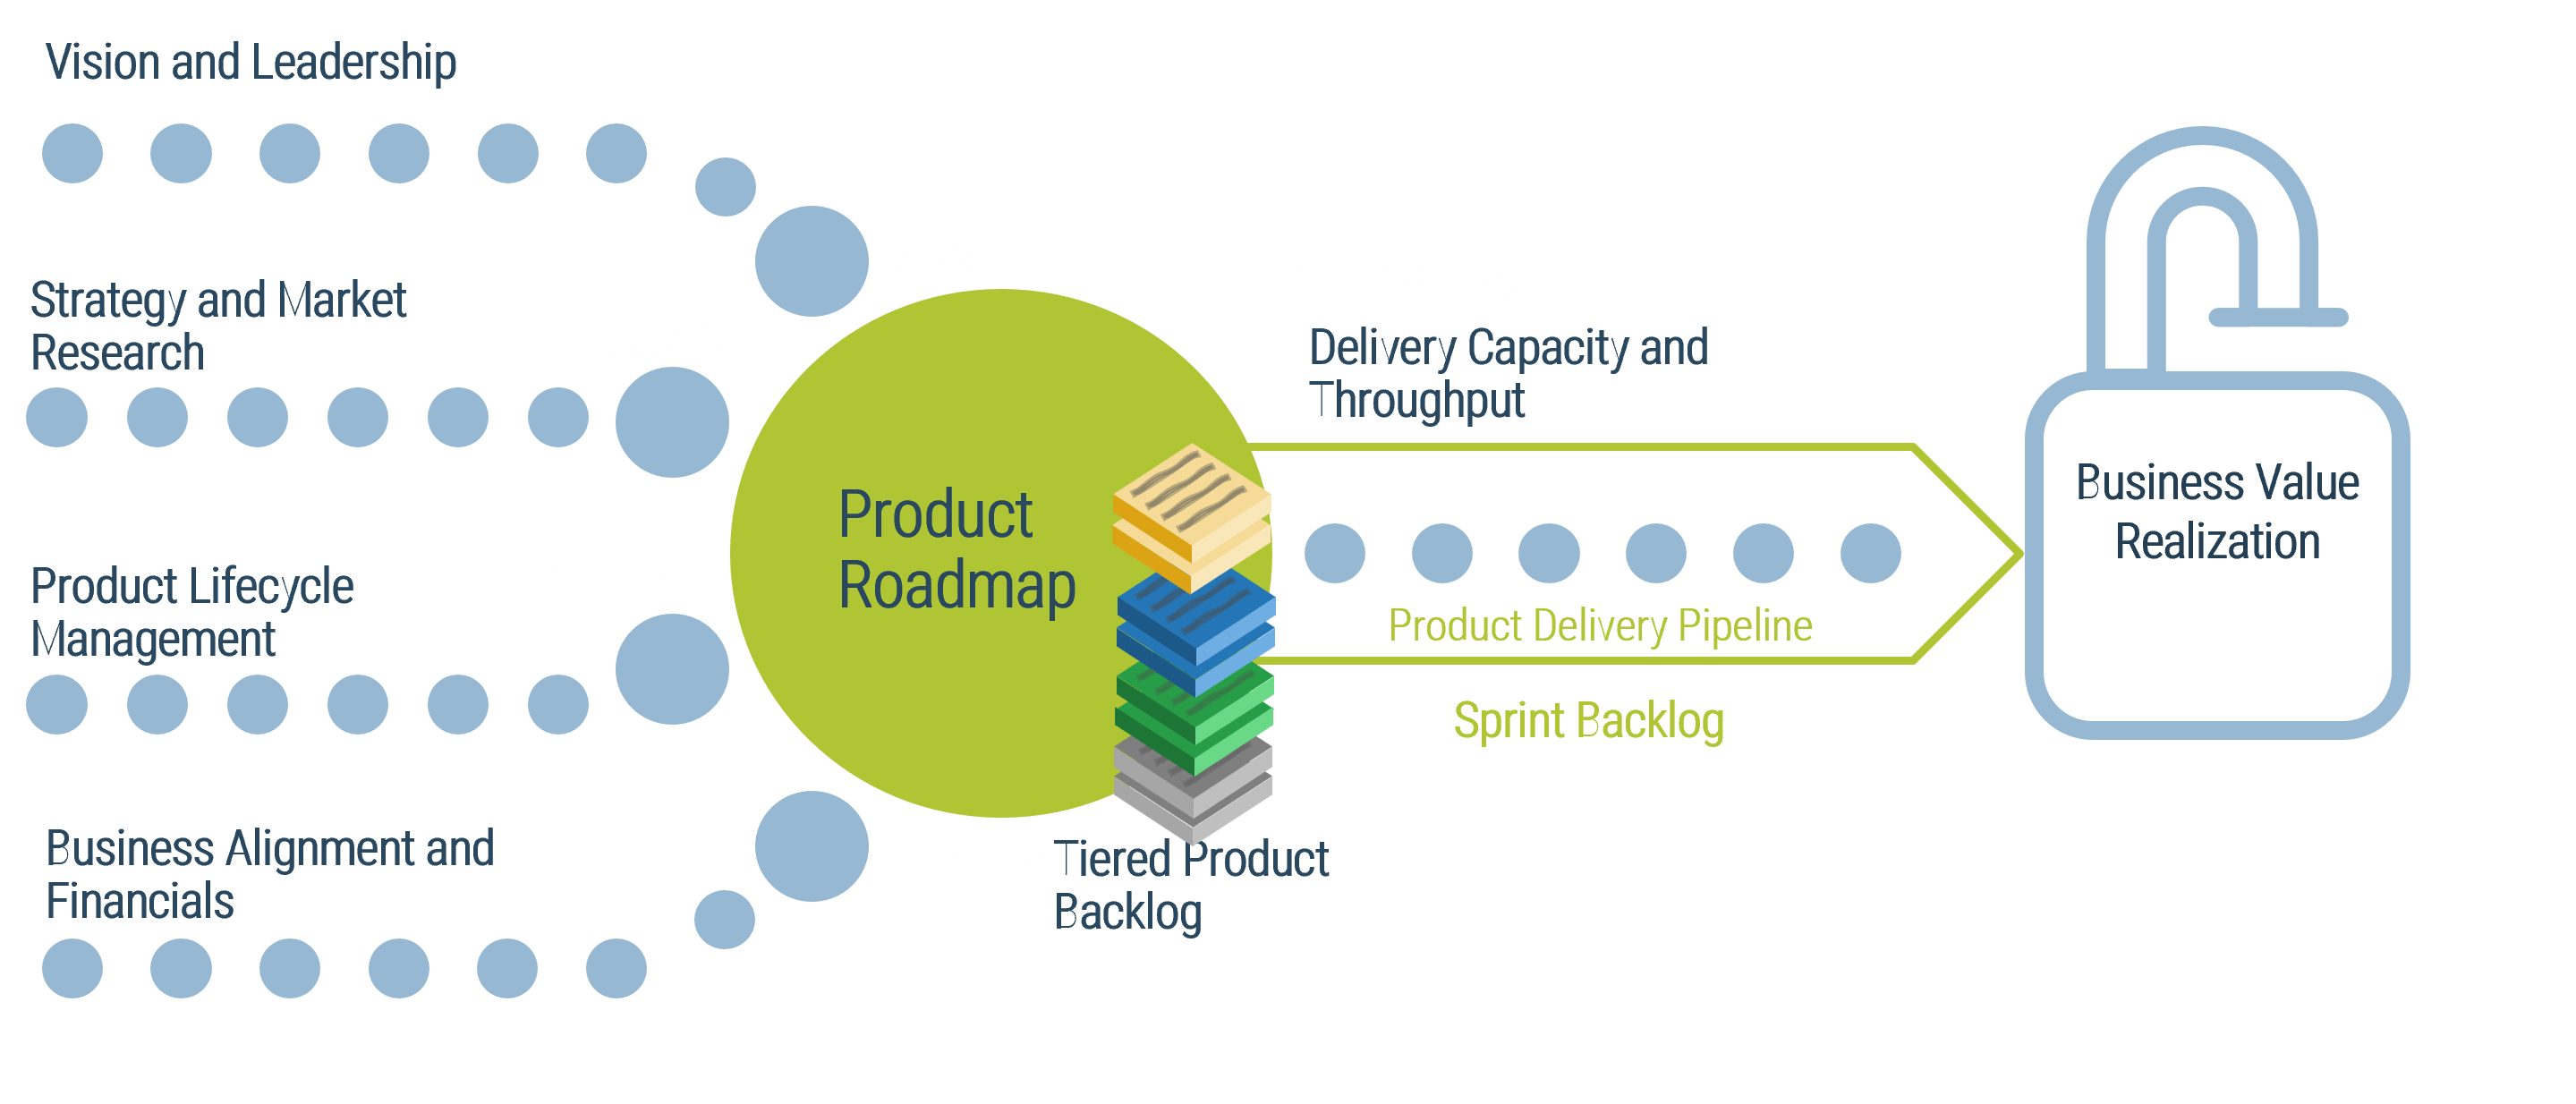 This is an image Adapted from: Pichler, What Is Product Management?